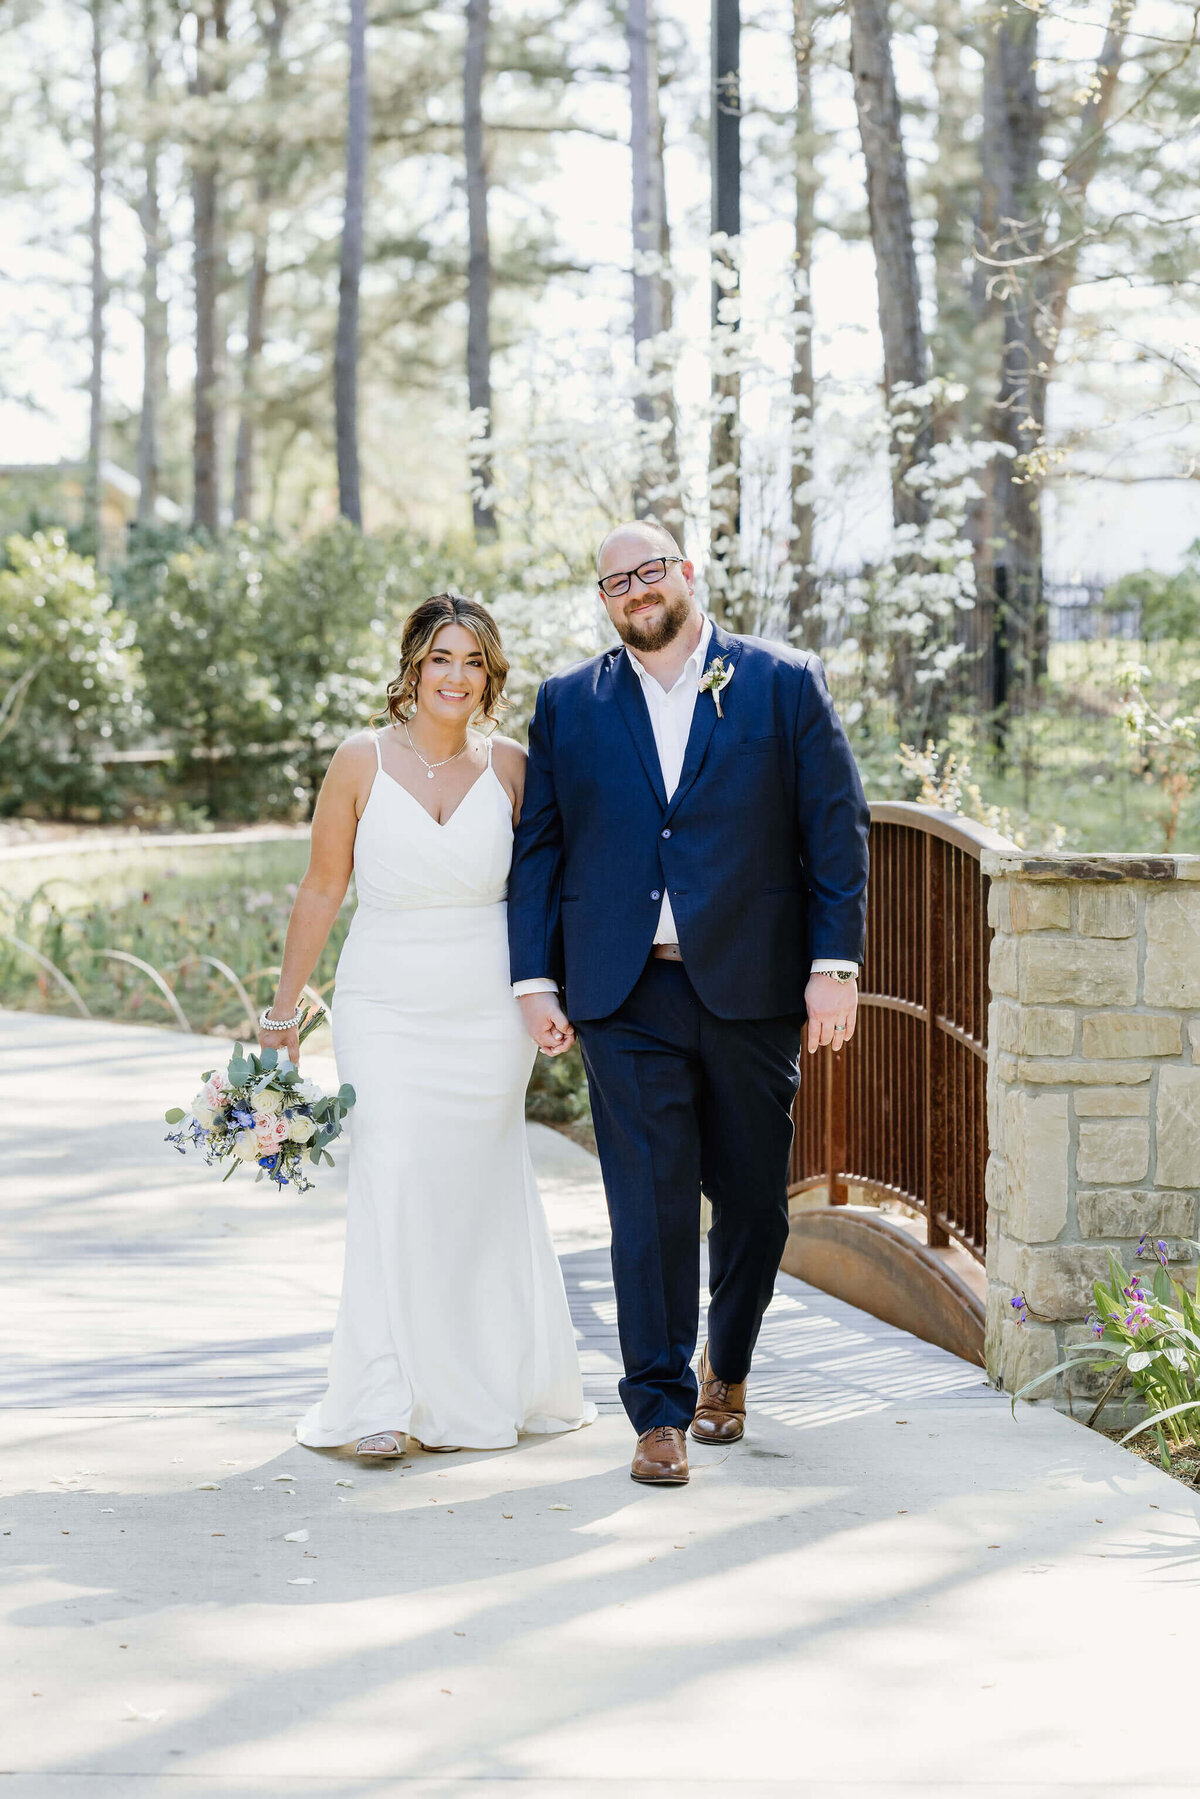 candid photo of bride and groom holding hands and walking through East Texas elopement venue after wedding ceremony